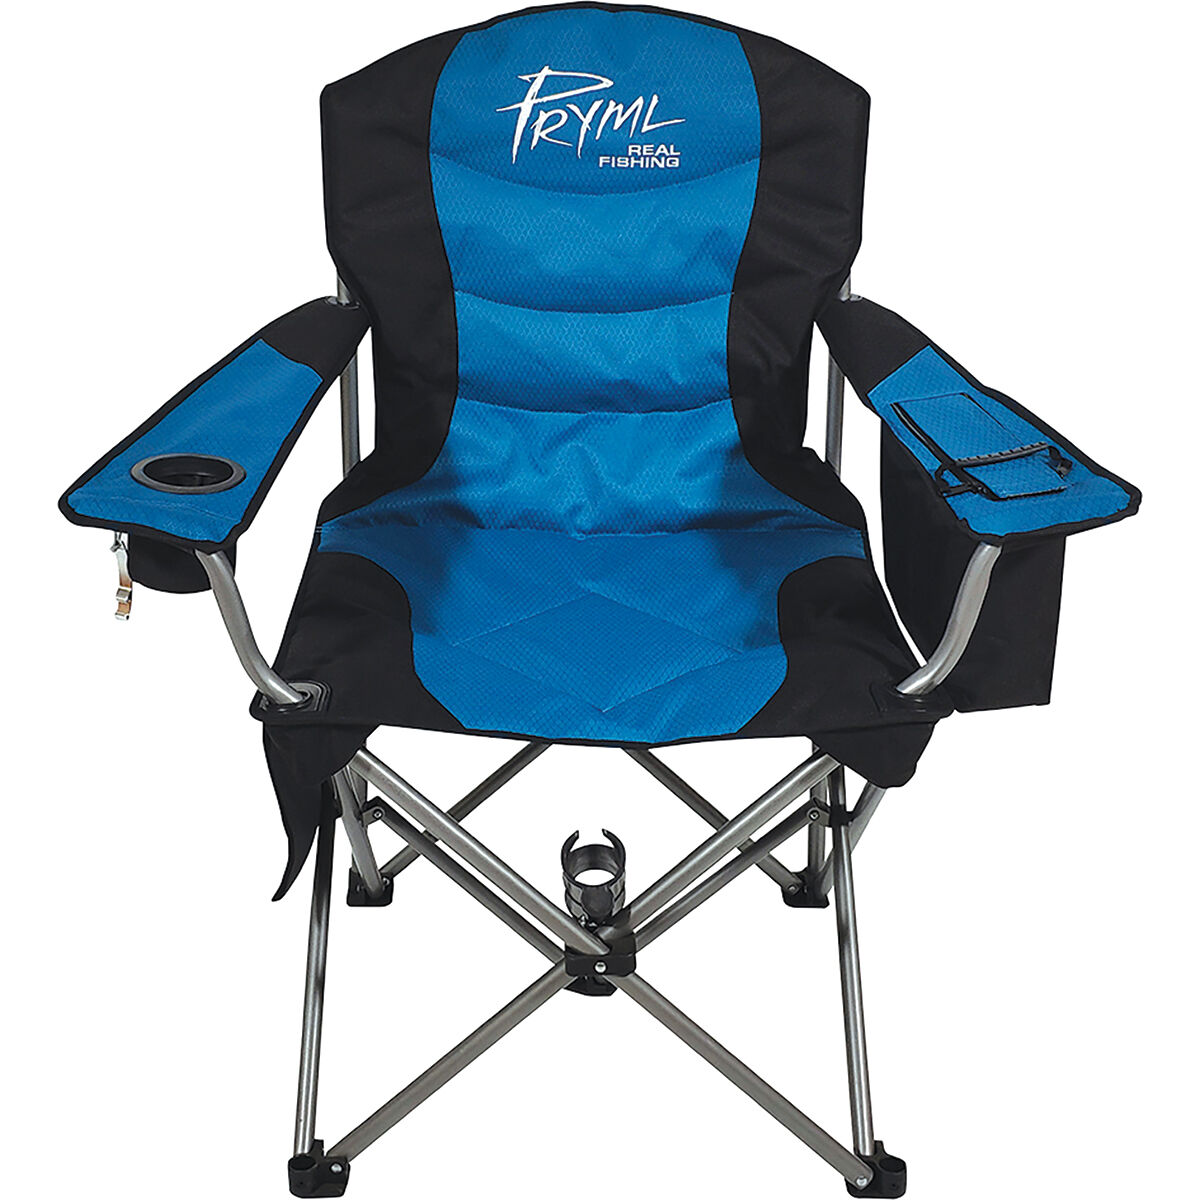 TuscanyPro Backpack Fishing Chair - Portable Folding Ultra Light Chair with Padded Carrying Straps & Padded Lumbar Support Bar - All Aluminum